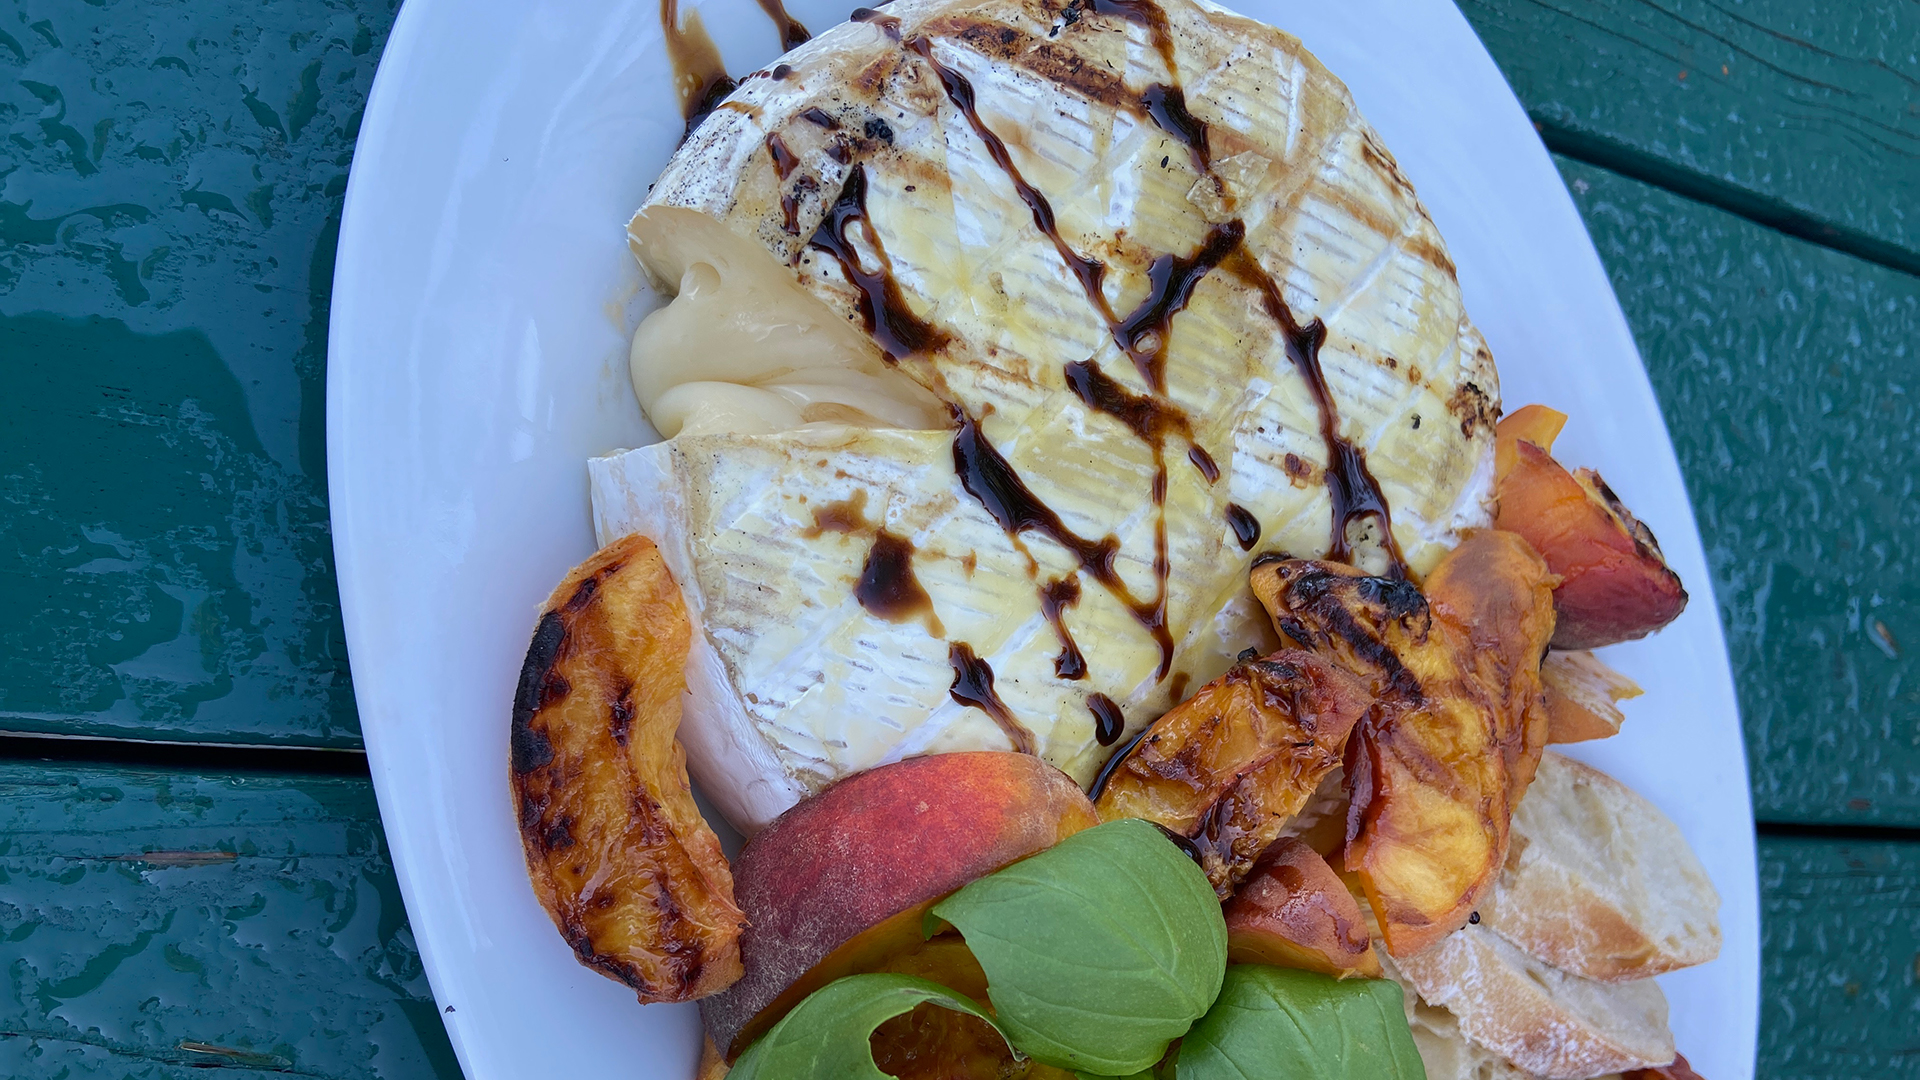 Grilled brie and peaches